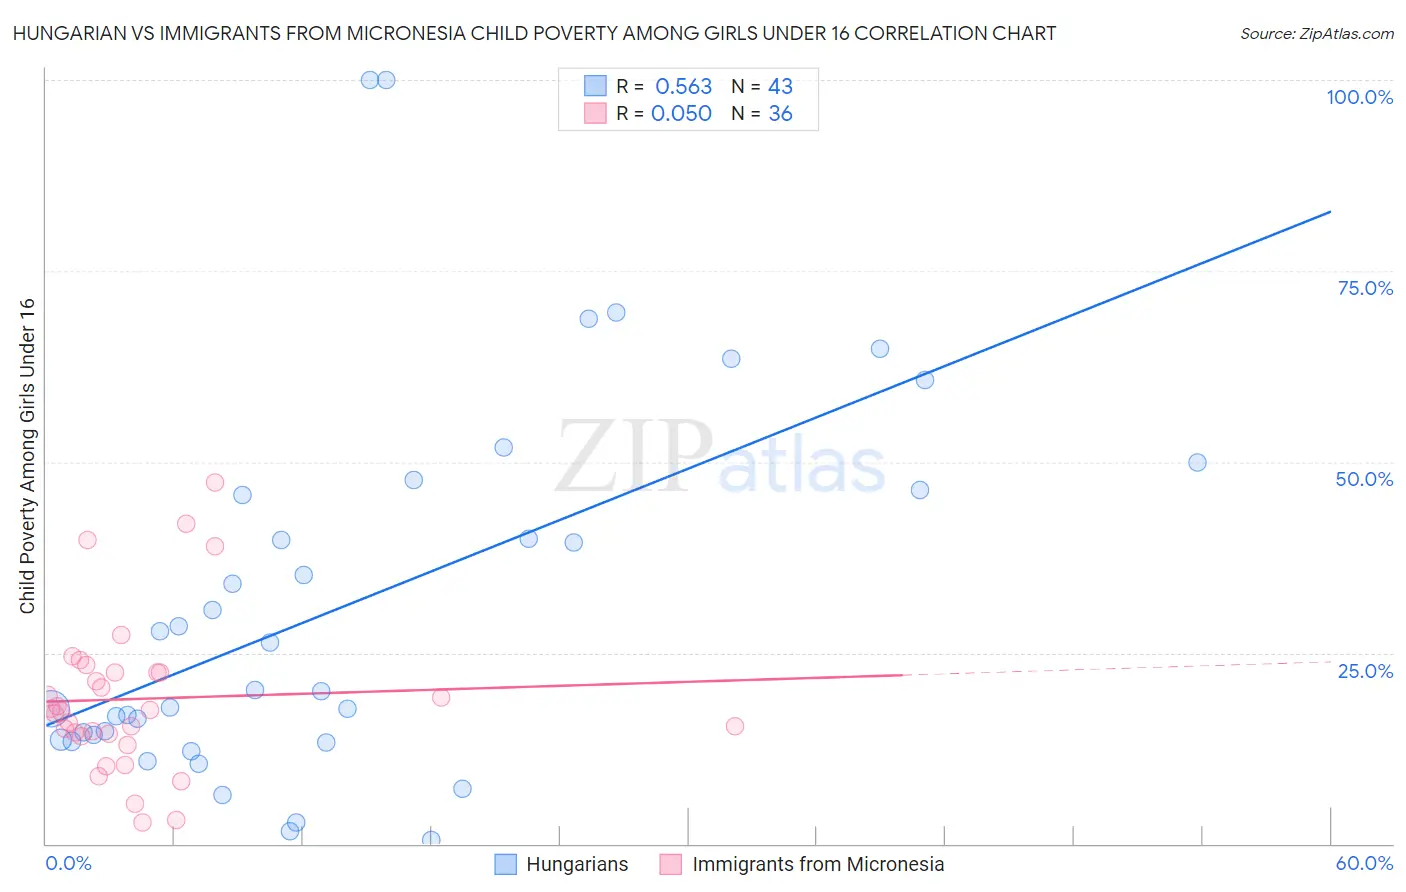 Hungarian vs Immigrants from Micronesia Child Poverty Among Girls Under 16